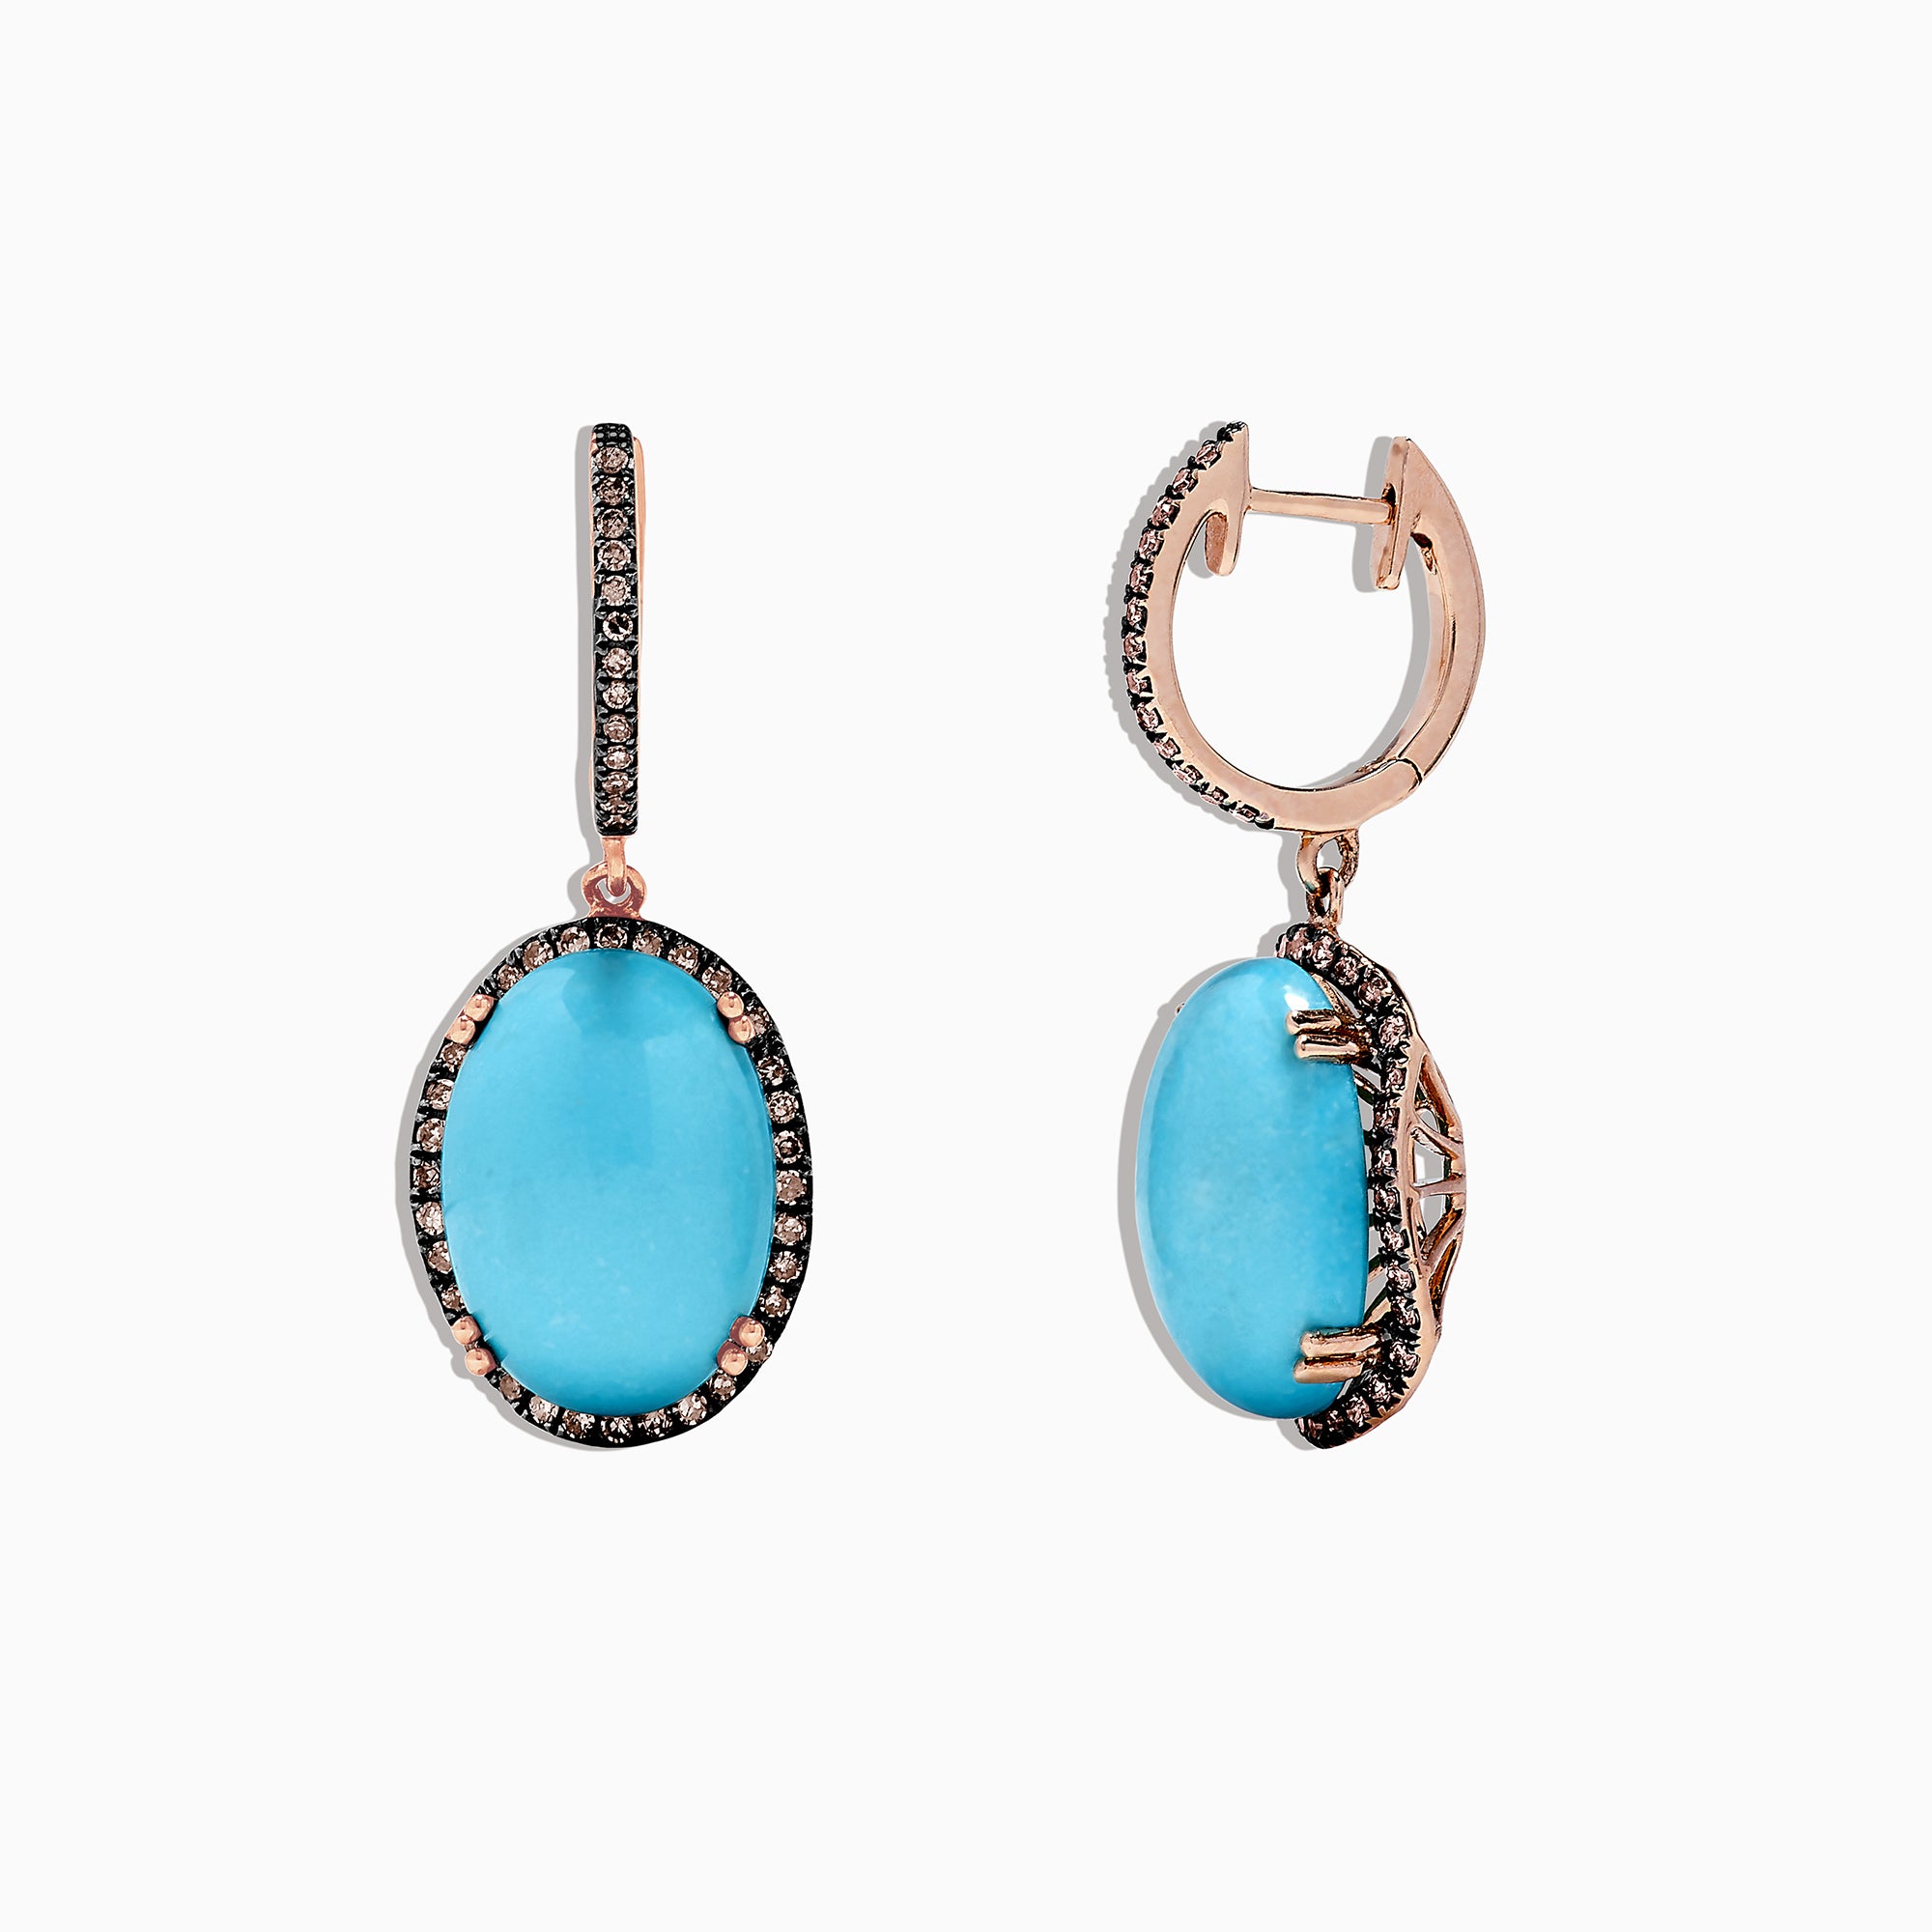 Effy 14K Rose Gold Turquoise and Diamond Earrings, 11.19 TCW